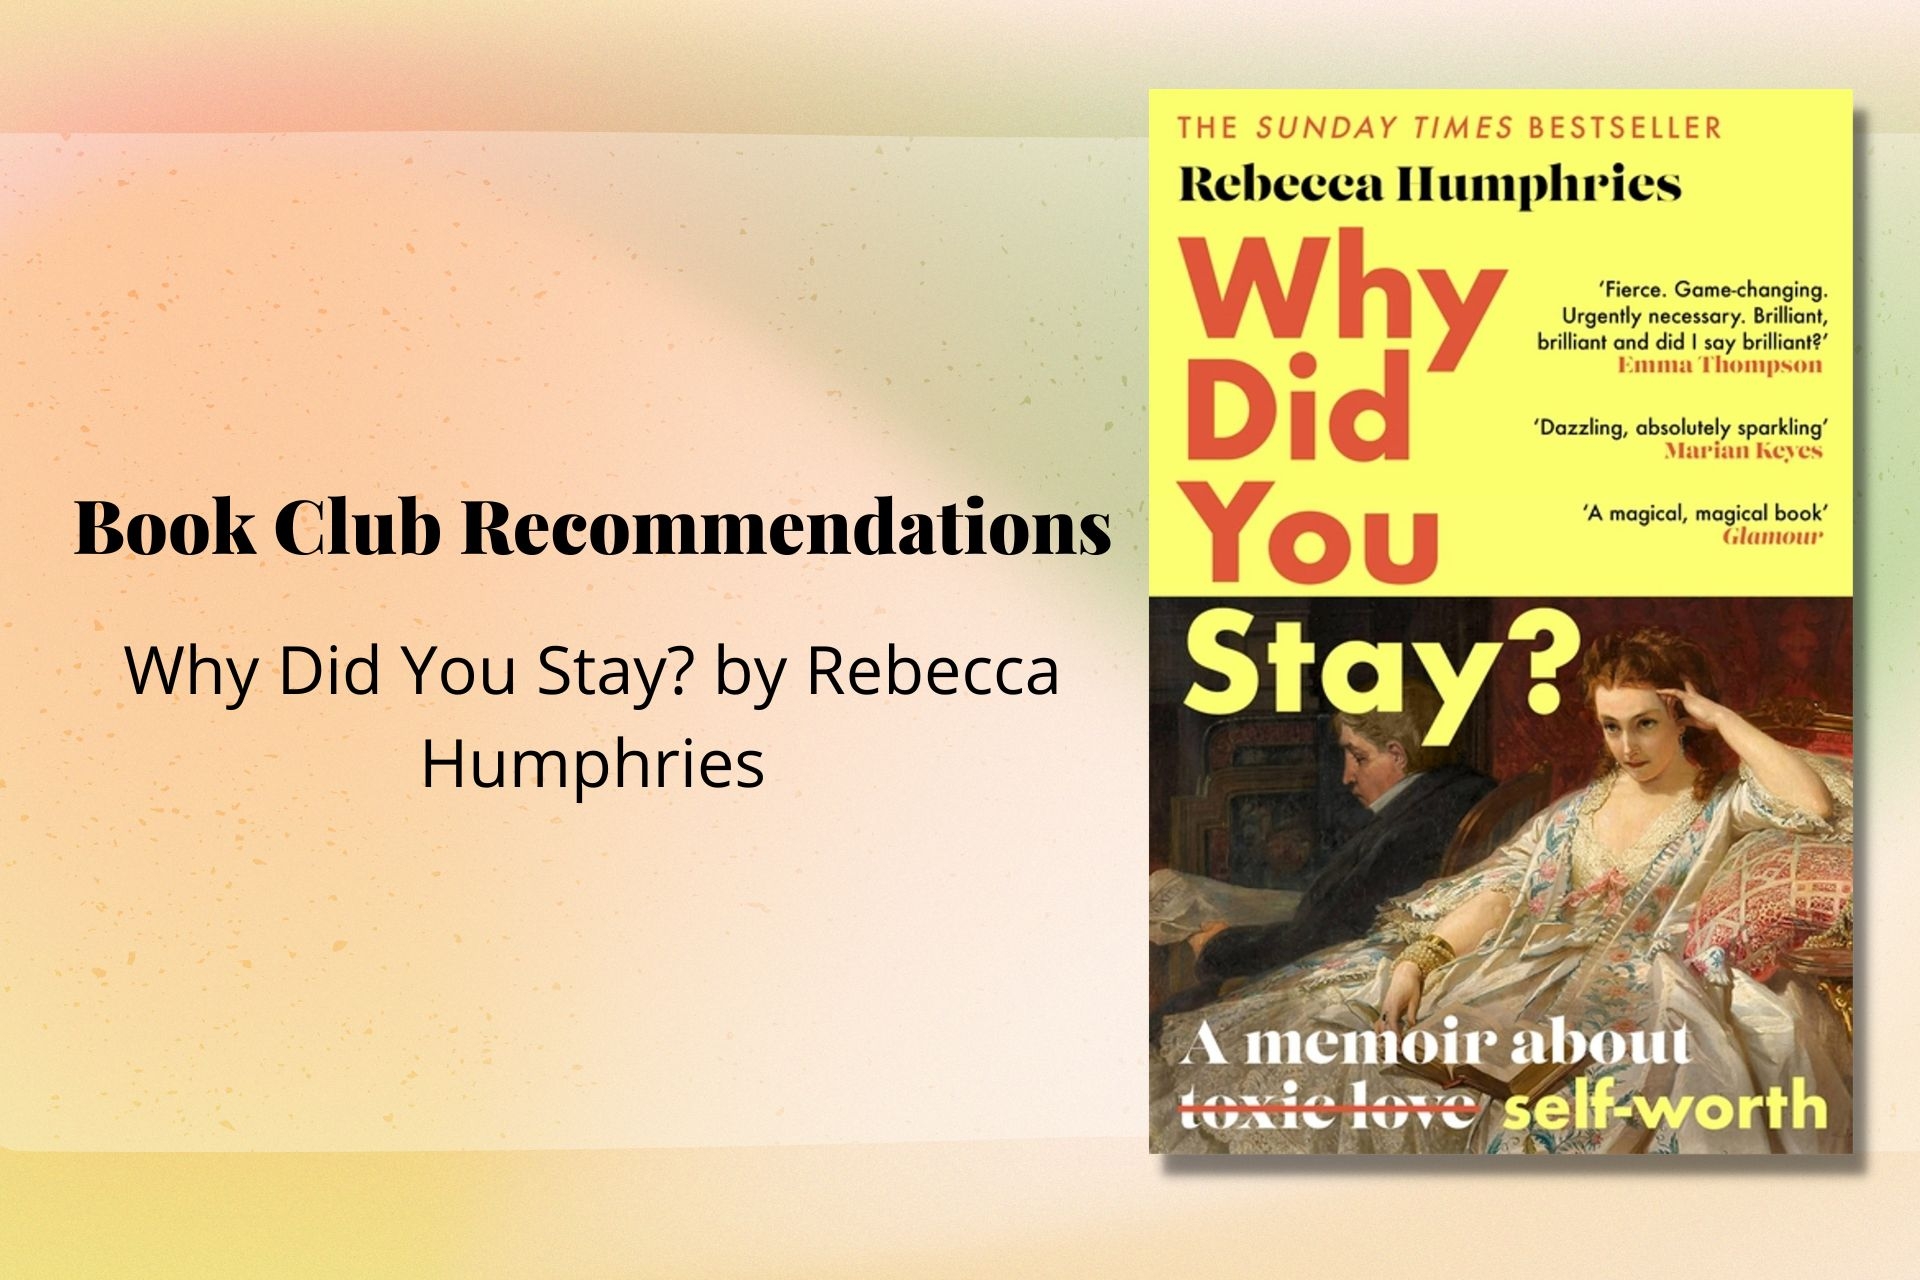 August 2022 Book Club Recommendation: Why Did You Stay? by Rebecca Humphries